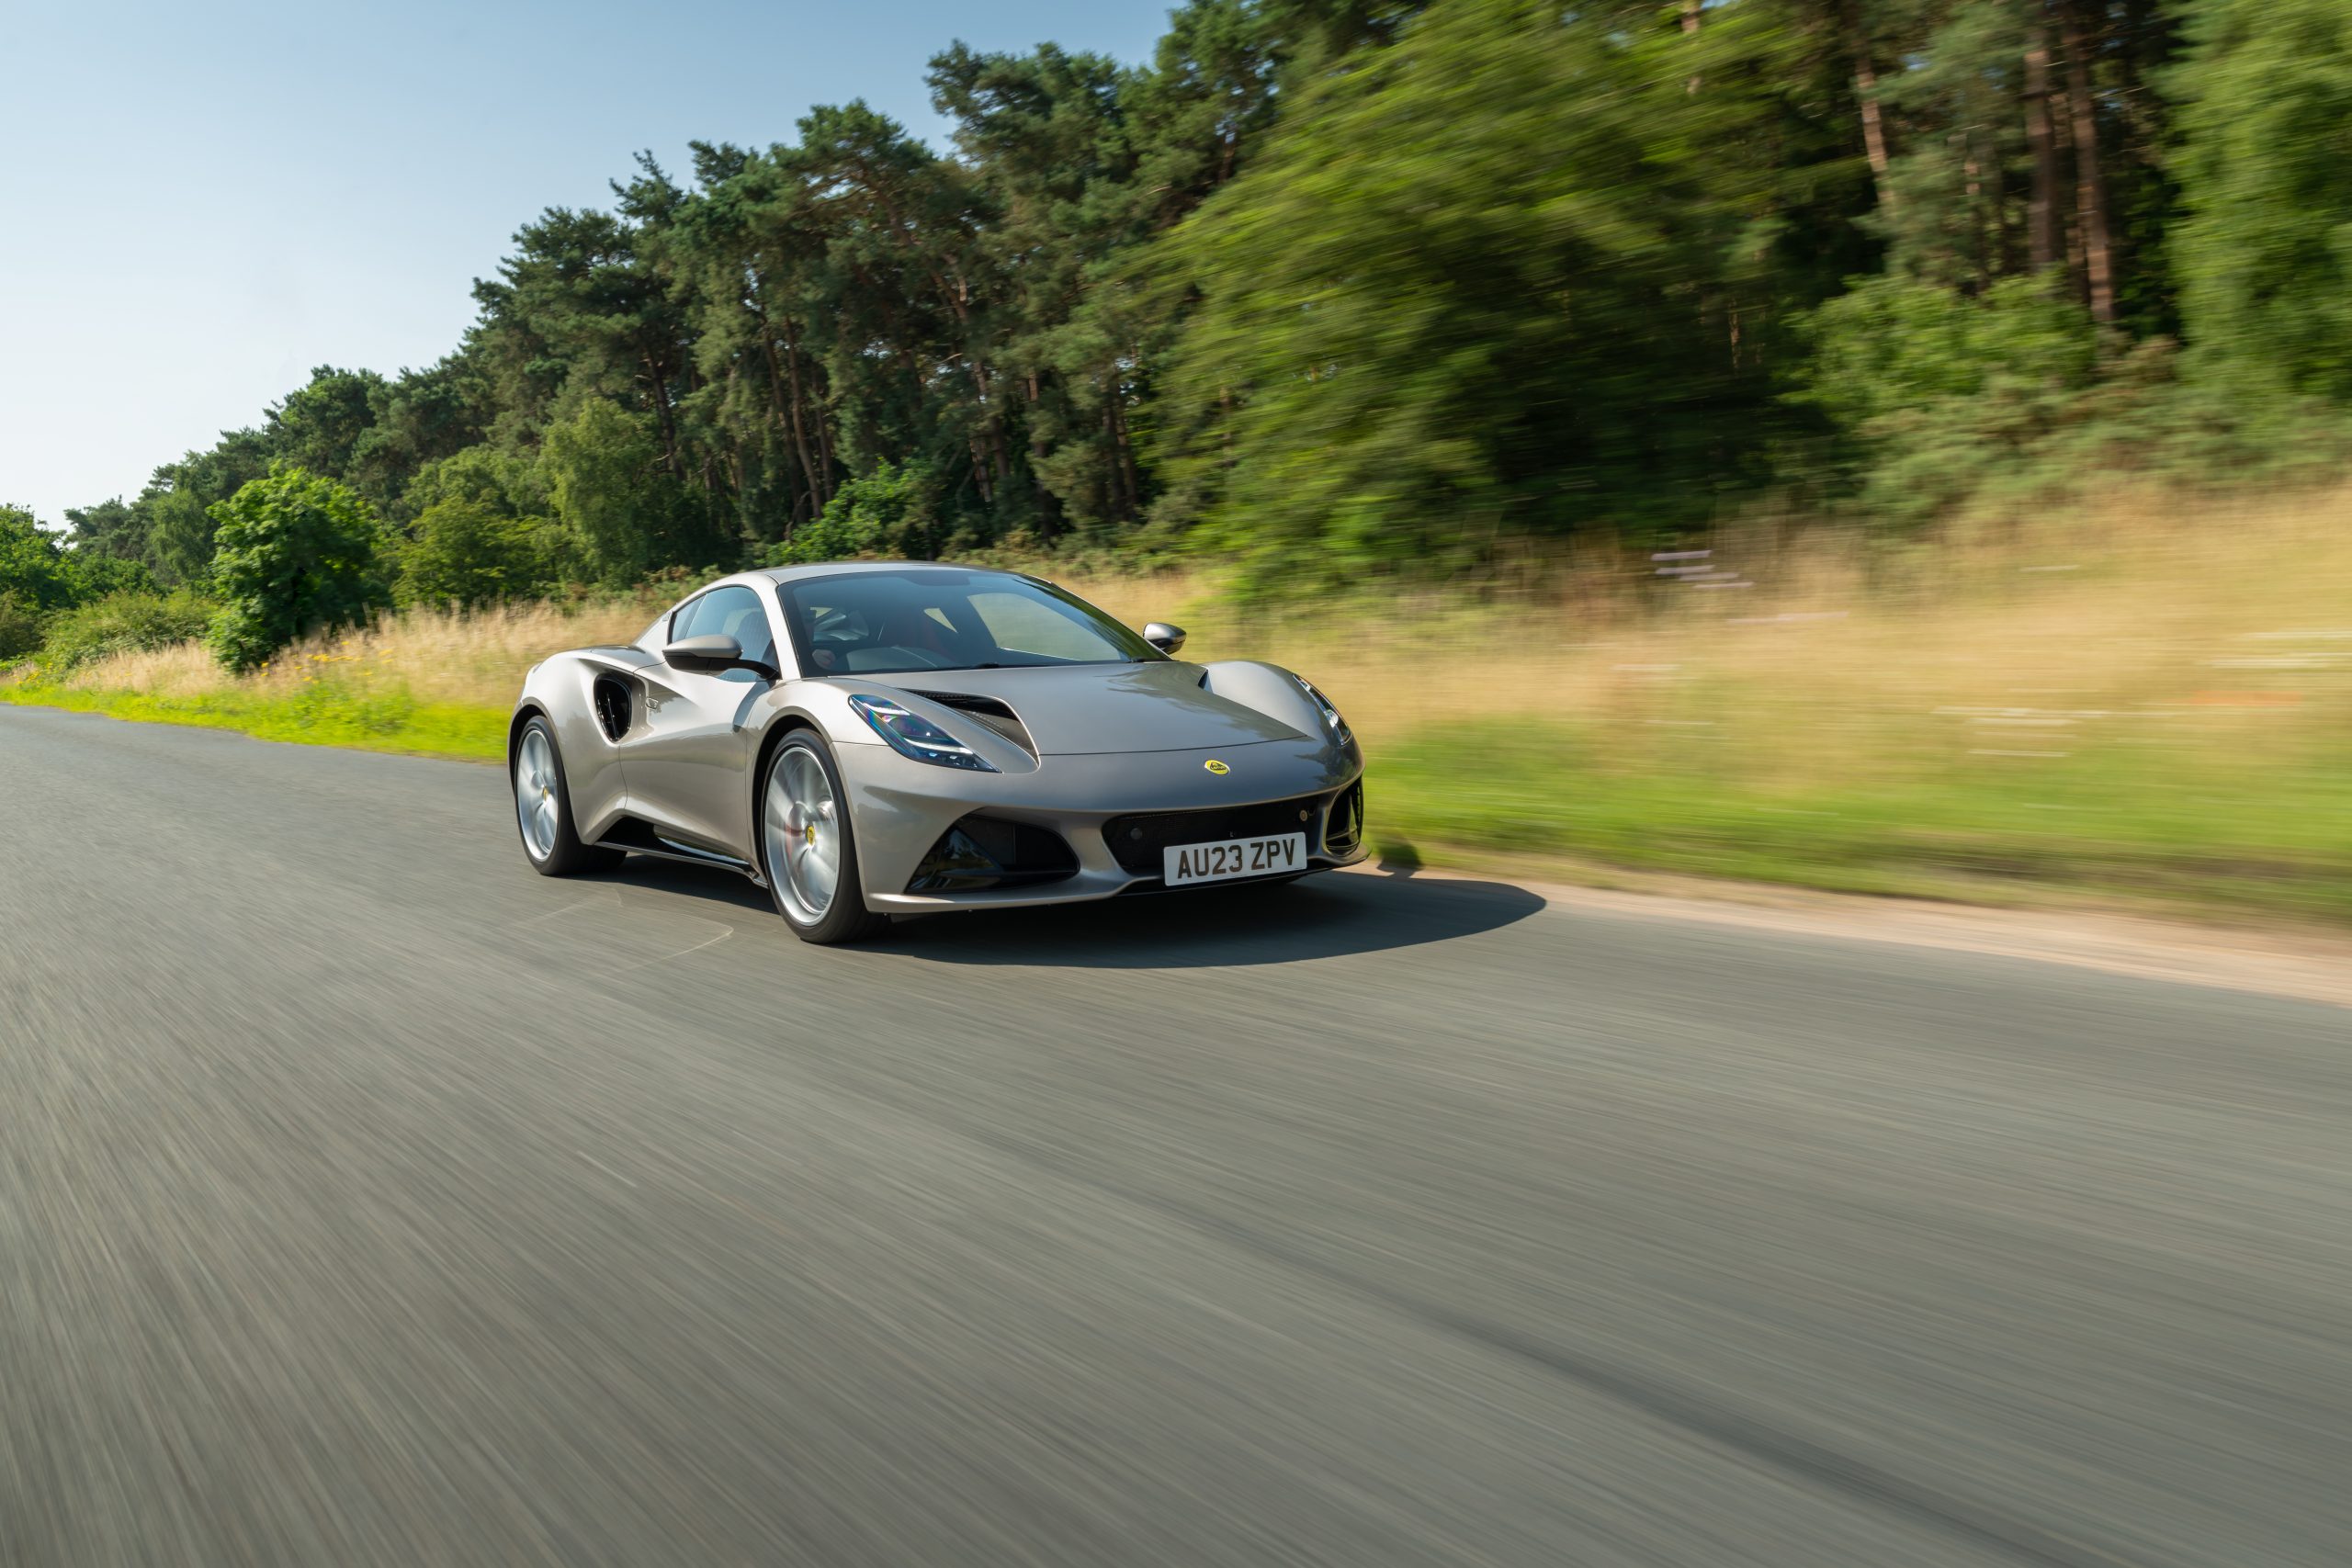 New Emira gets the most powerful four-banger in Lotus history